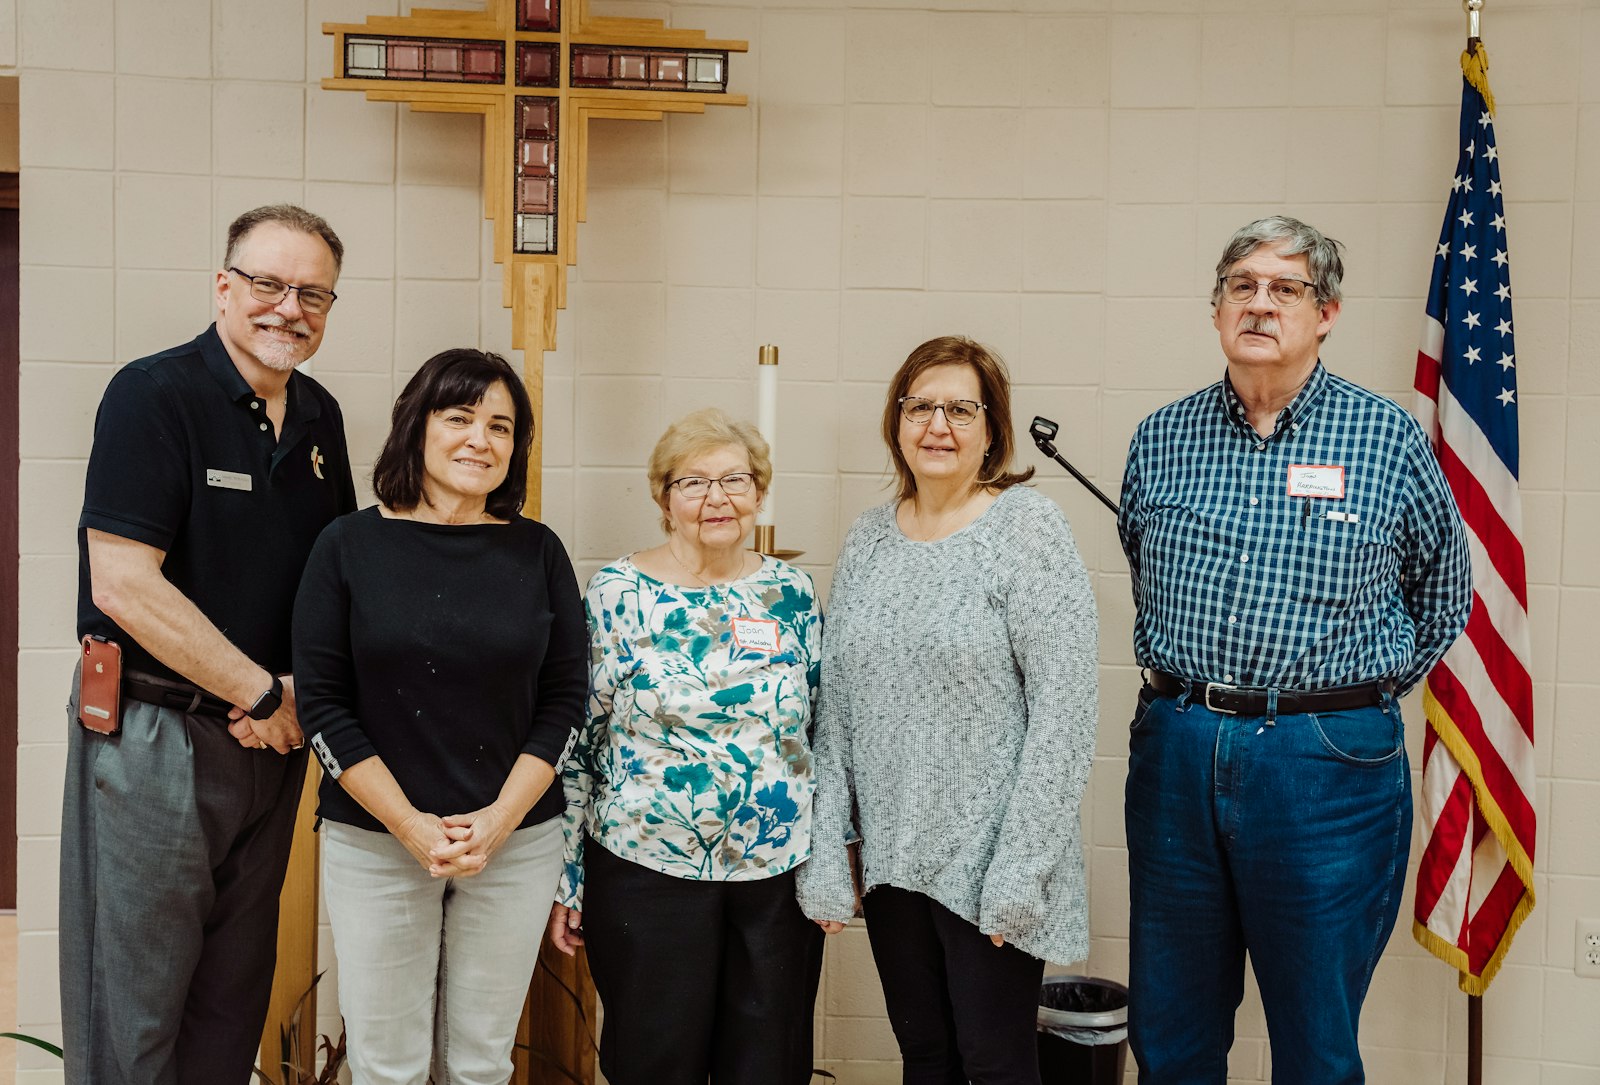 Left to right, Deacon Marc Rybinski (St. Paul of Tarsus), Cheryl Cannon (from St. Thecla), Joan Jeffers (St. Malachy), Carol Challis (St. Malachy) and John Harrington (St. Ronald) pose for a photo after a meeting of Christian service leaders for the four parishes, which together make up Central Macomb Family 5.